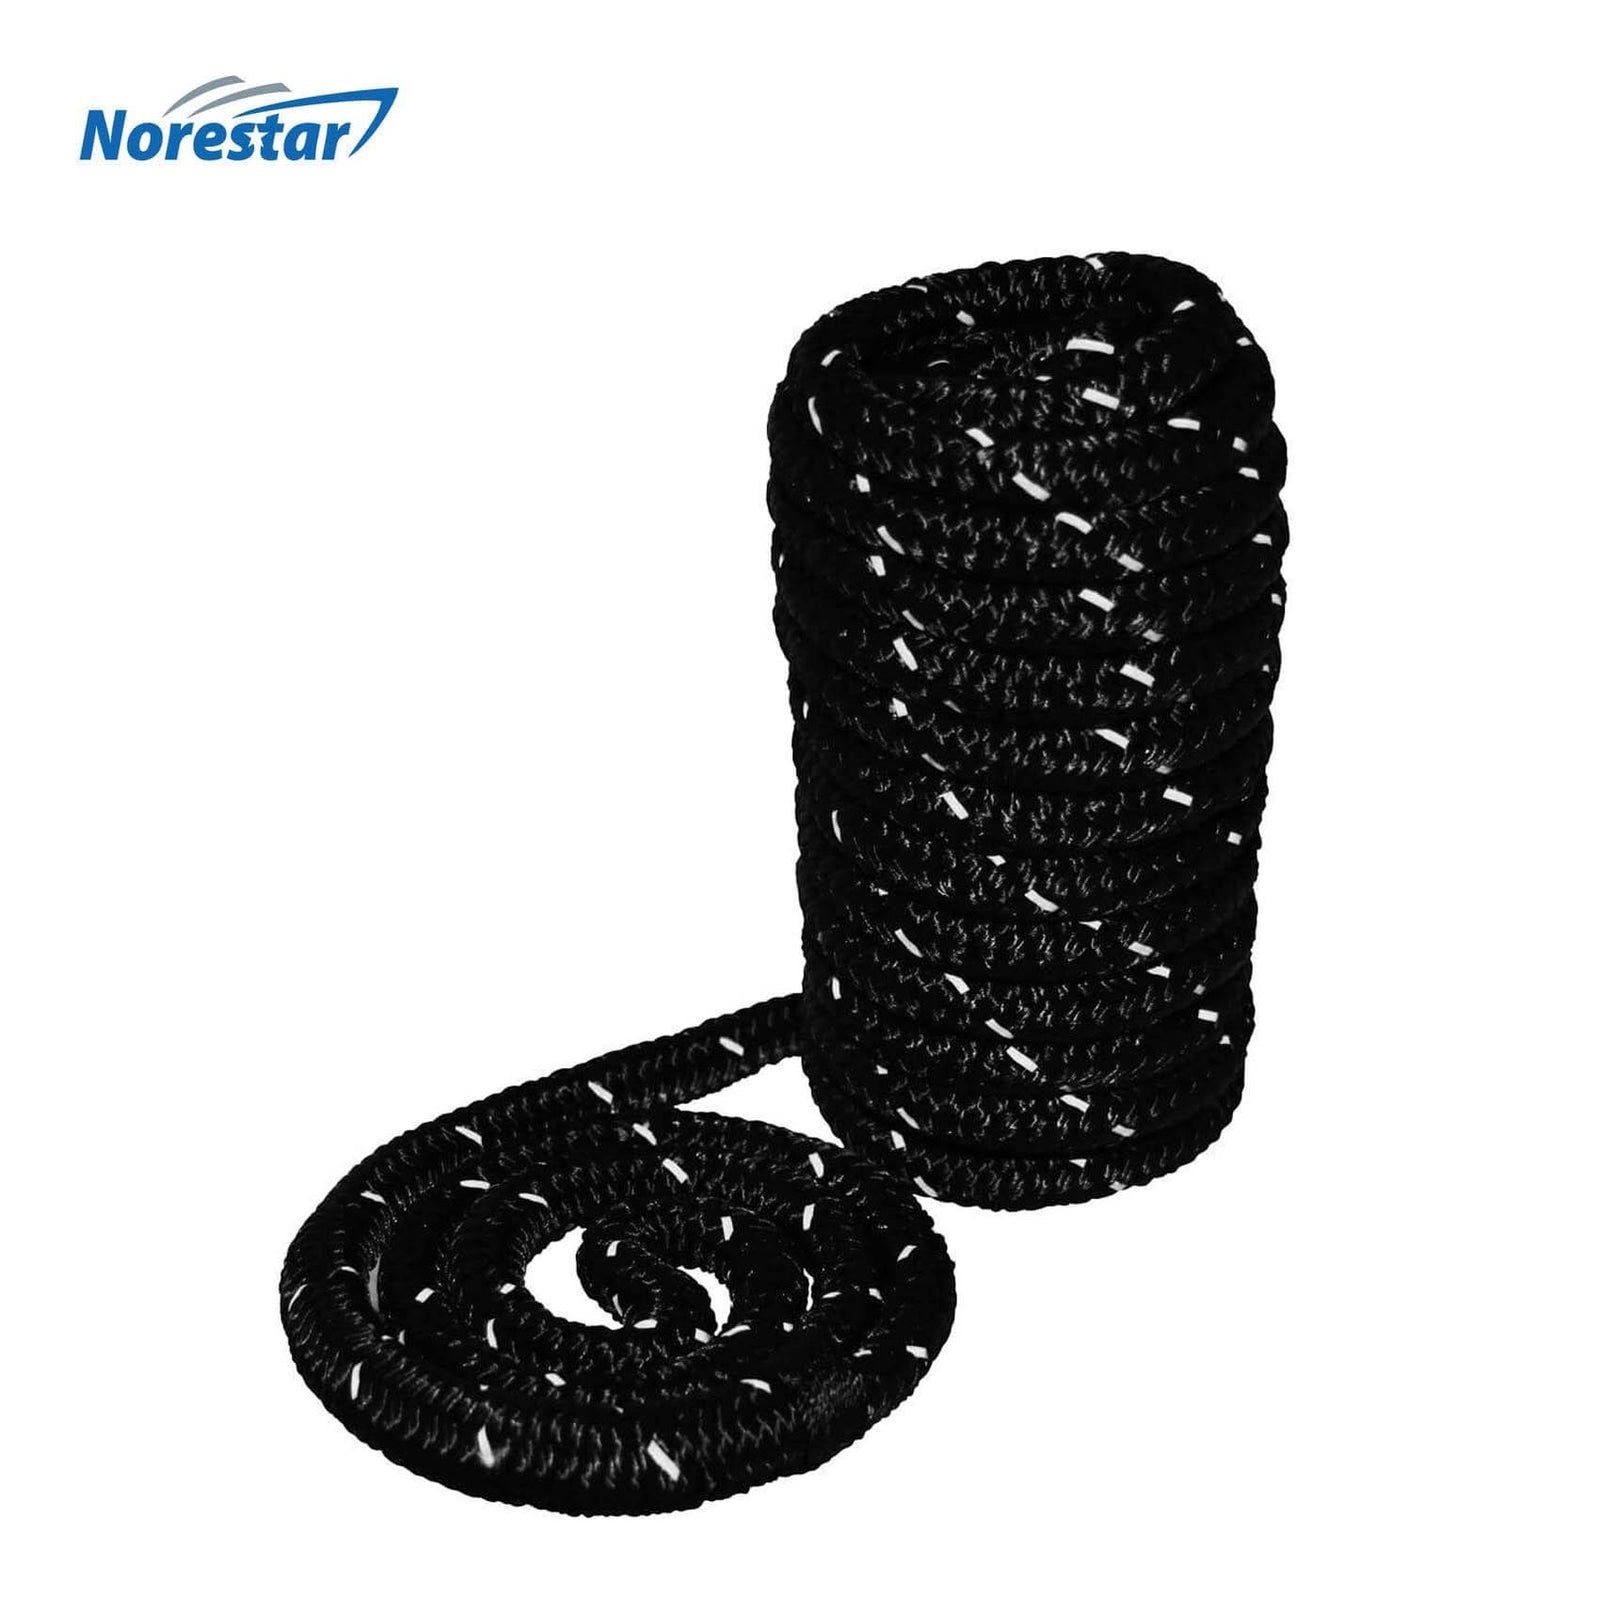 High-Visibility Reflective Braided Nylon Dock Line, Black - in Low Light